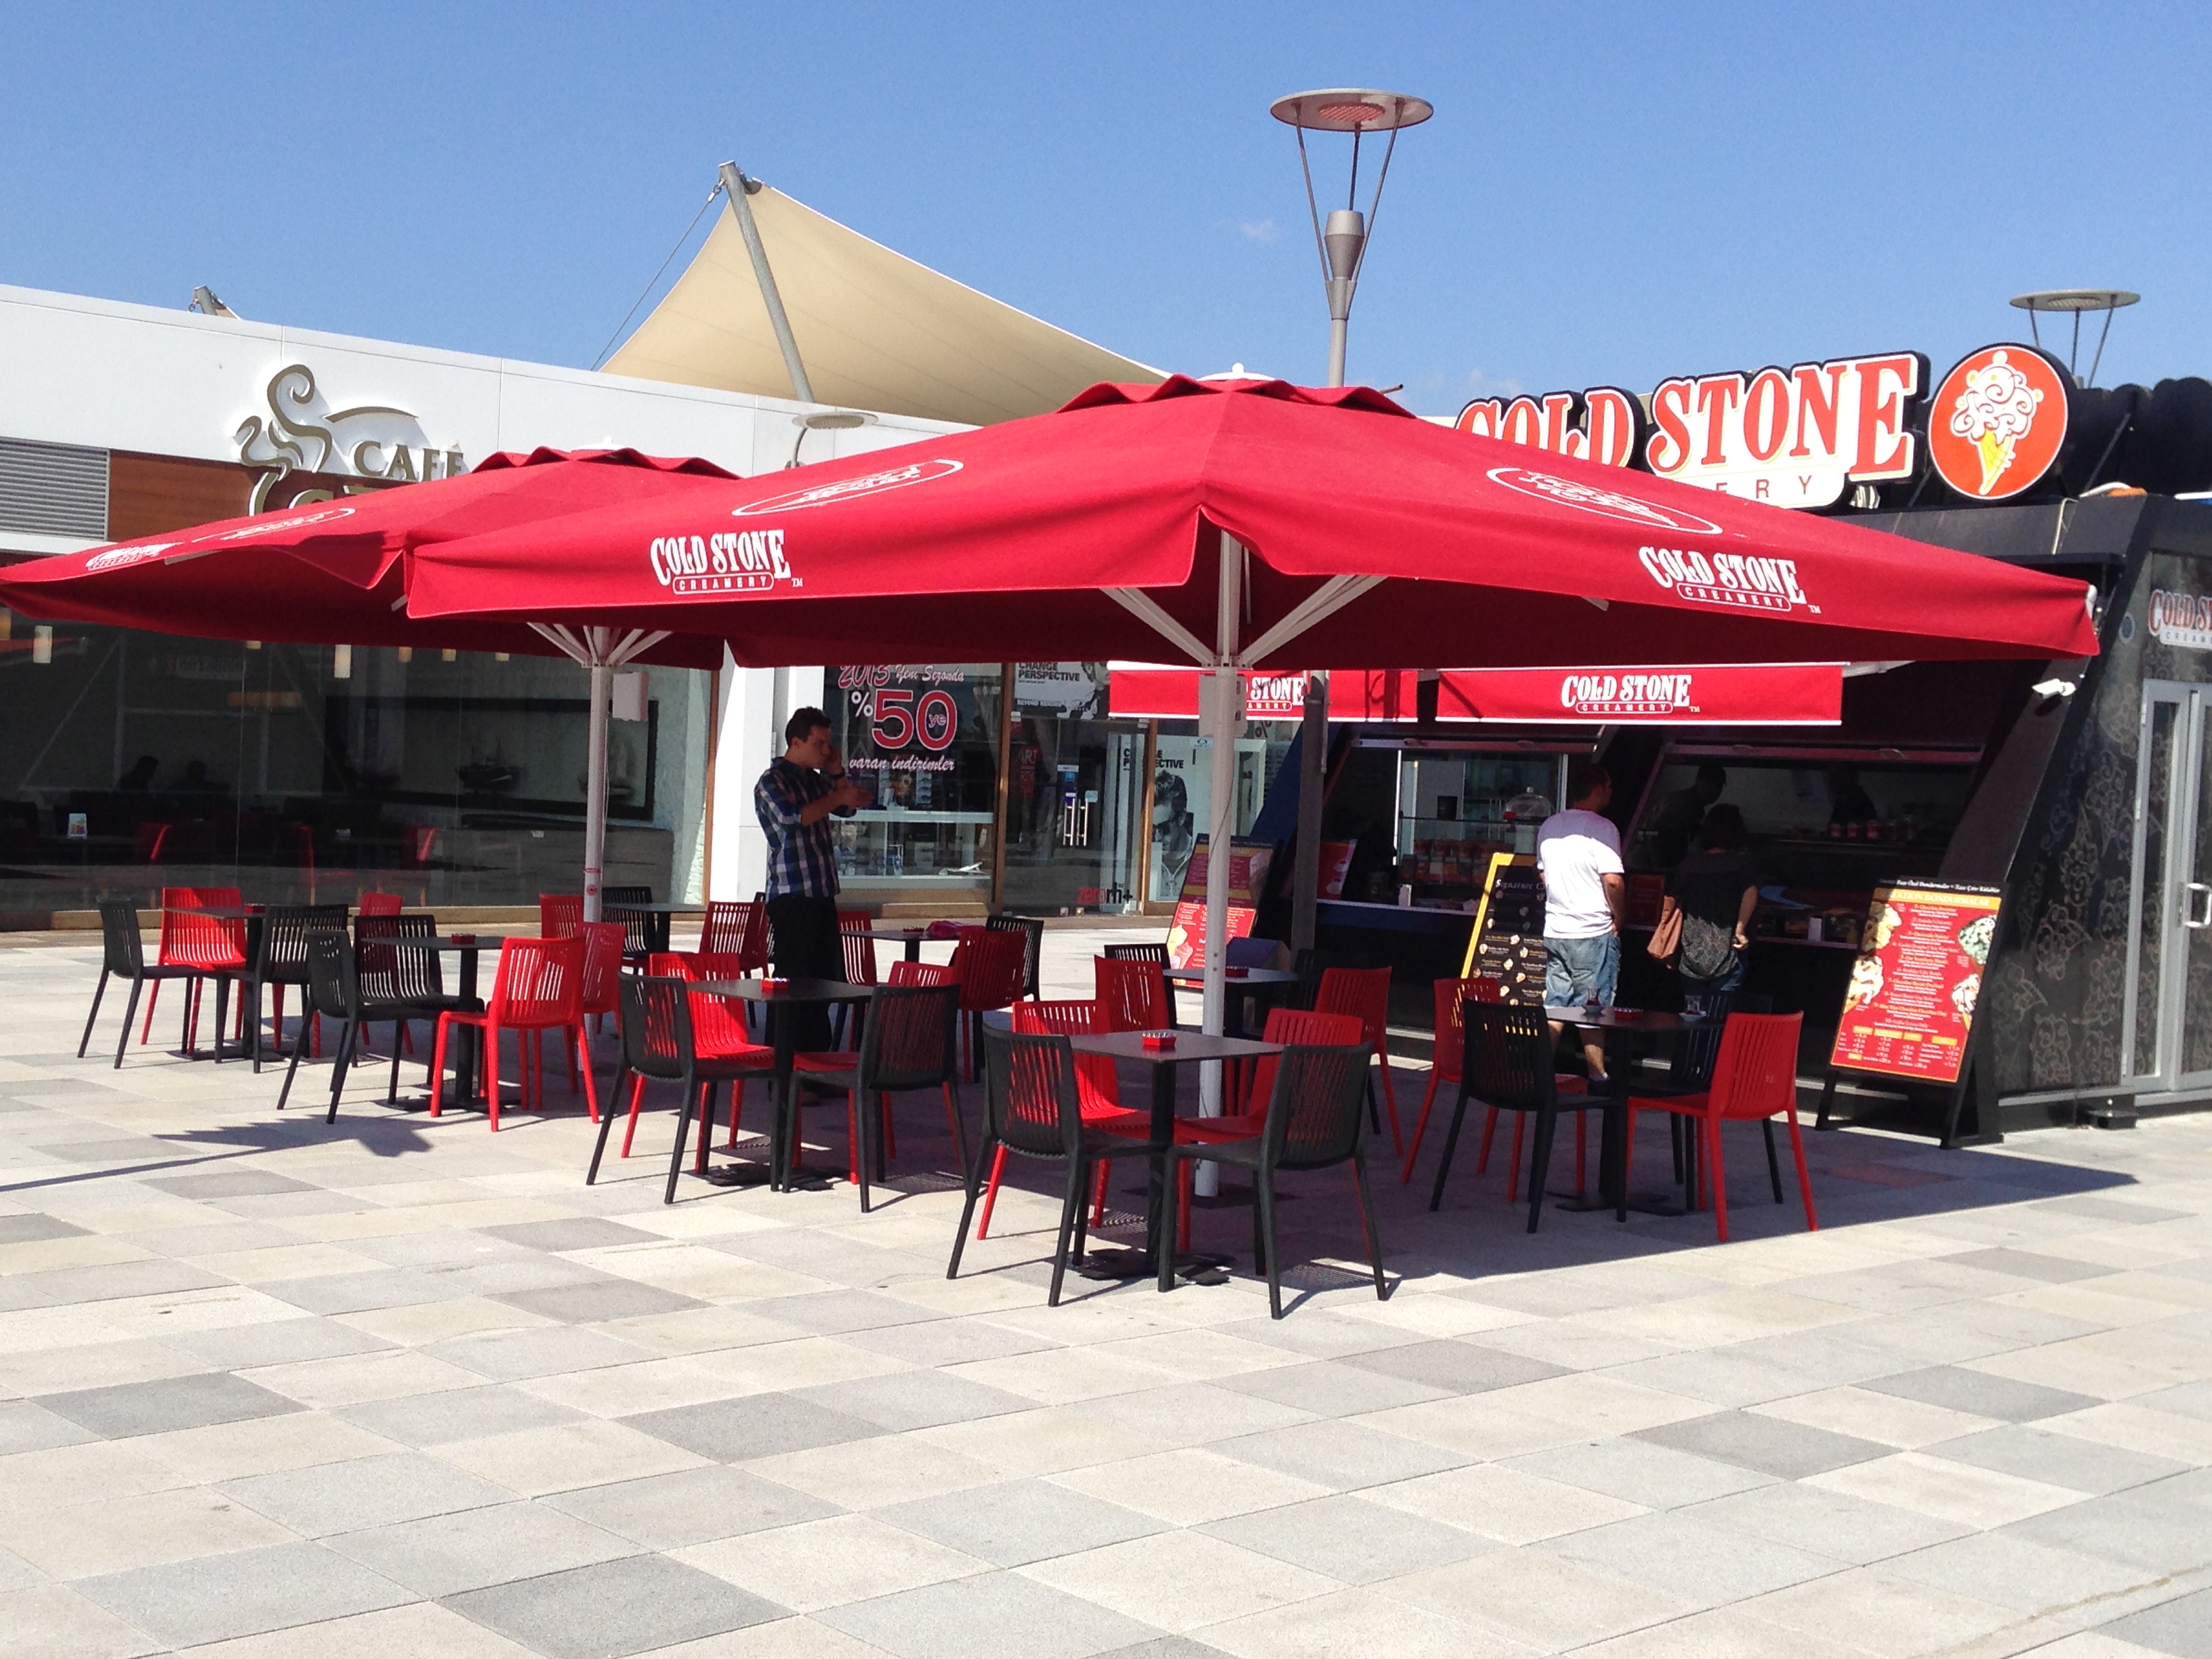 Exterior of Cold Stone Creamery in Turkey.